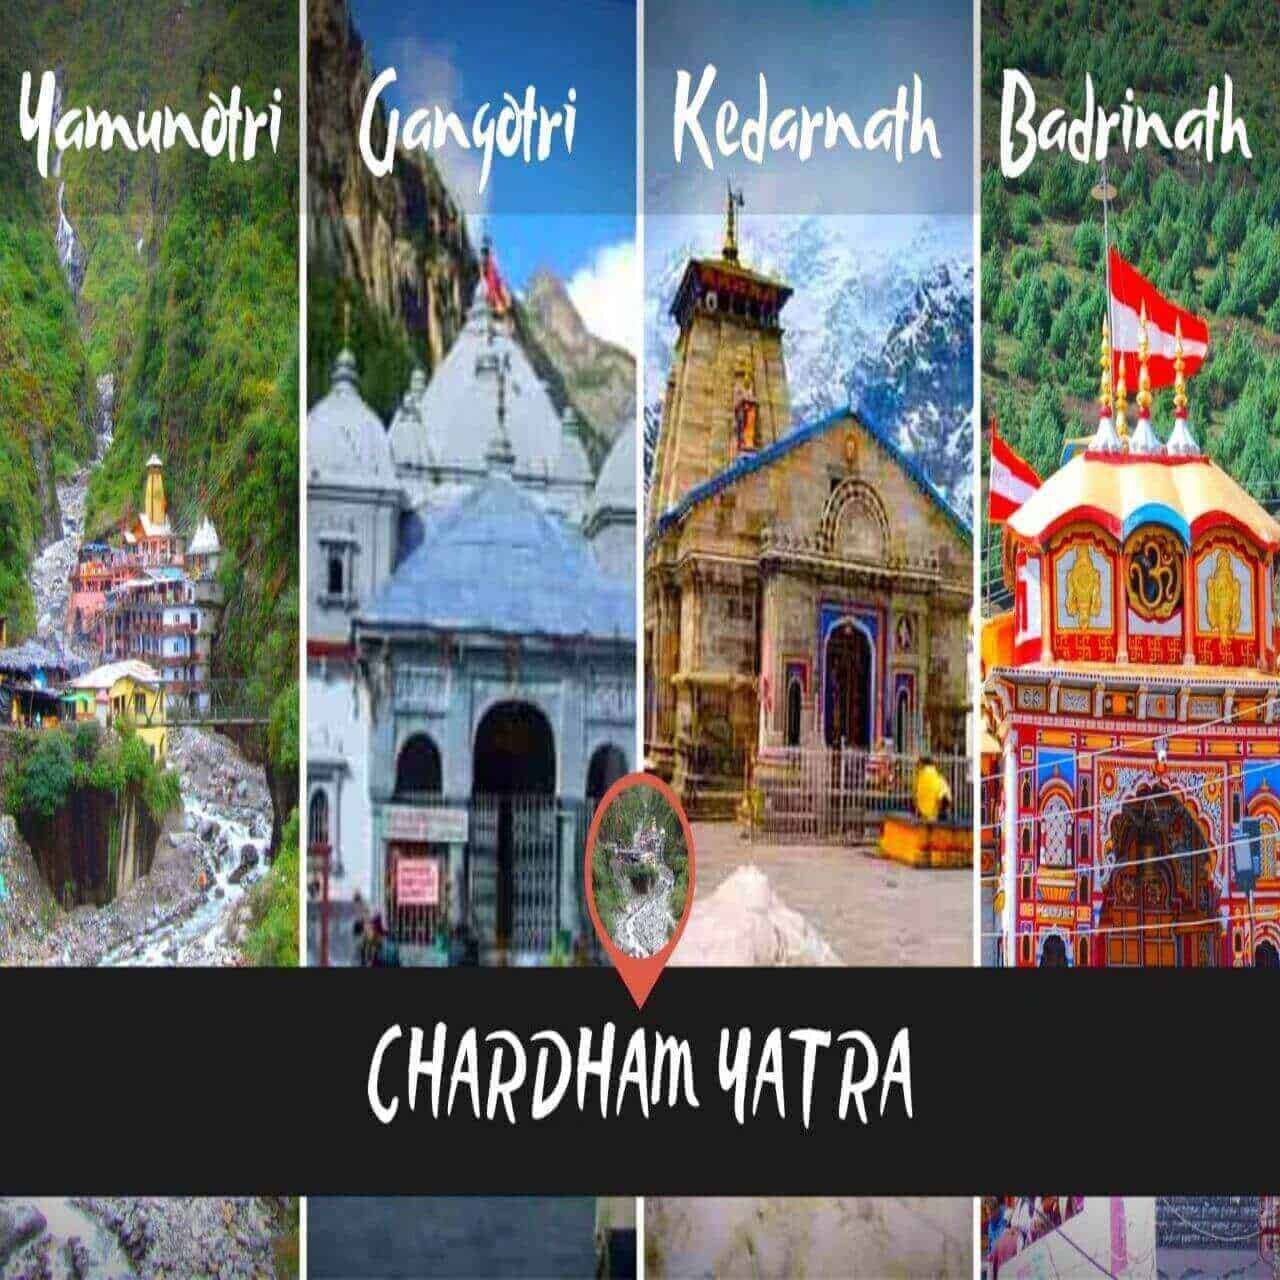 Chardham Yatra by Helicopter - Book Chardham Yatra Tour Package Online